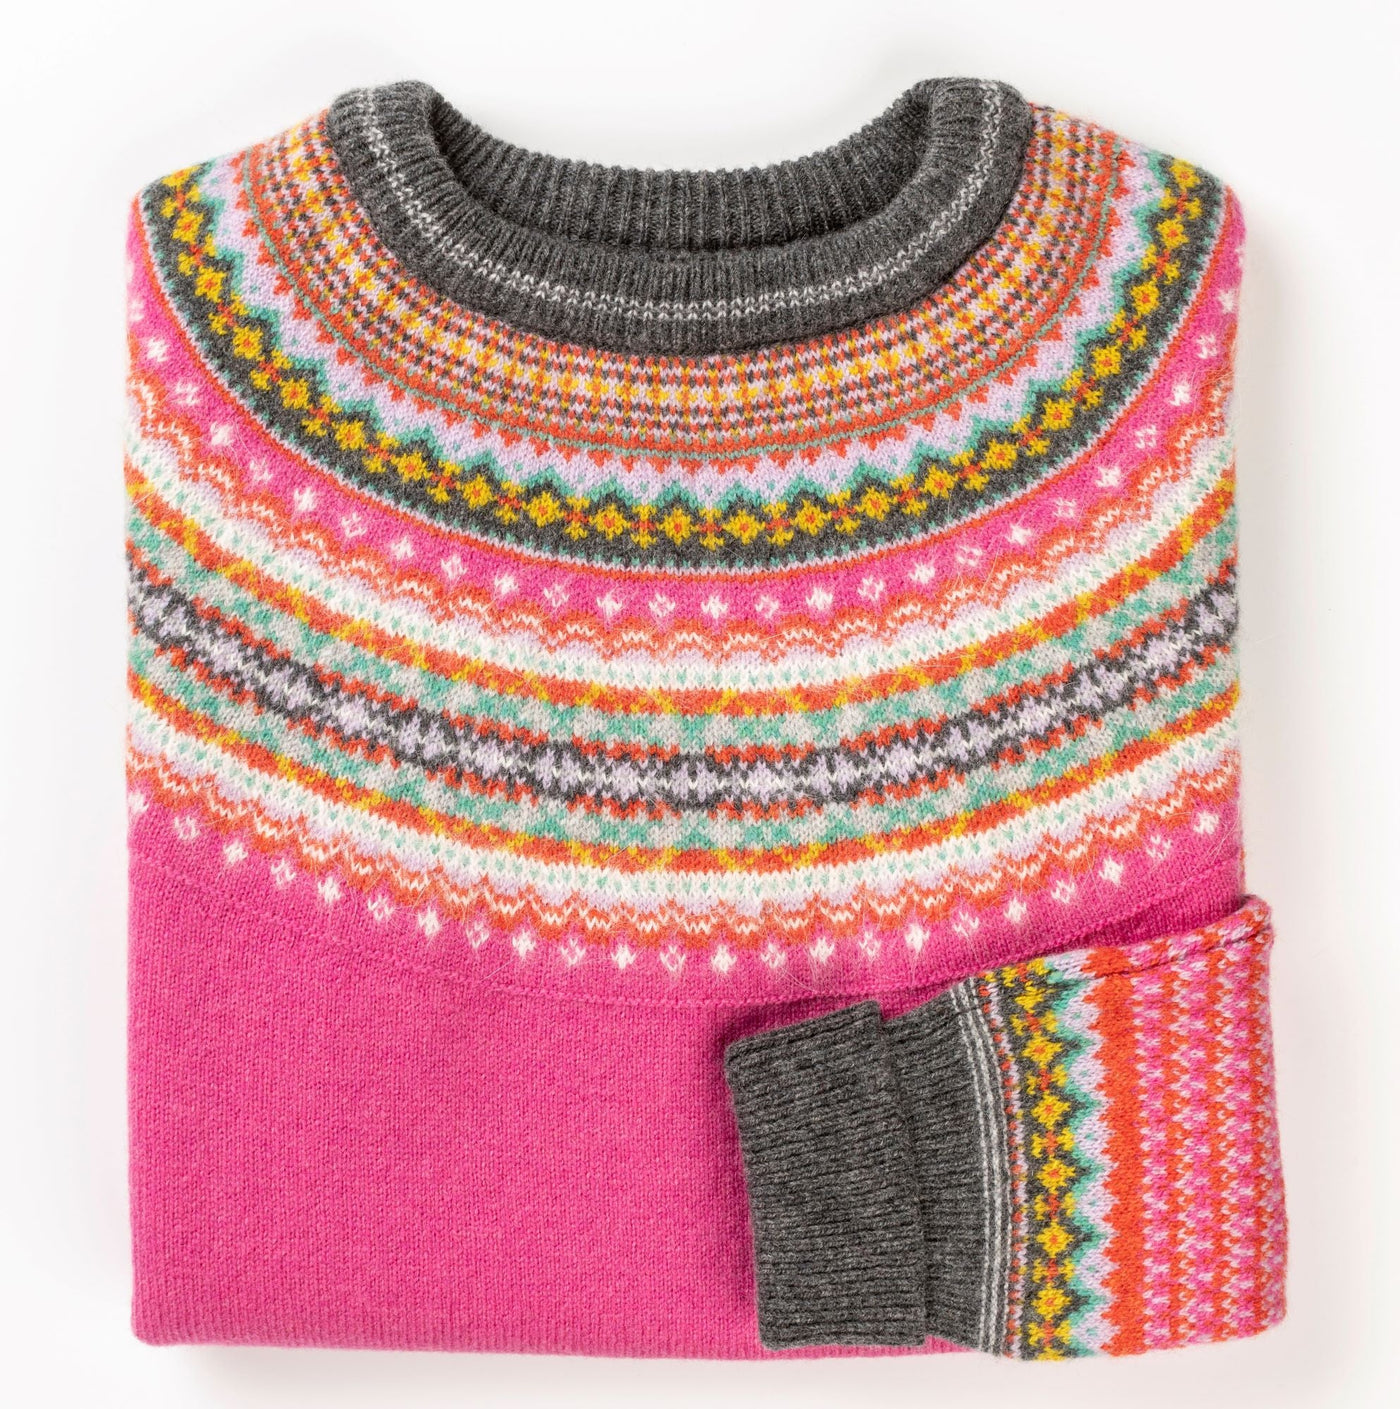 Eribe Alpine Sweater in Fiesta - PLEASE CALL FOR SIZE AVAILABILITY